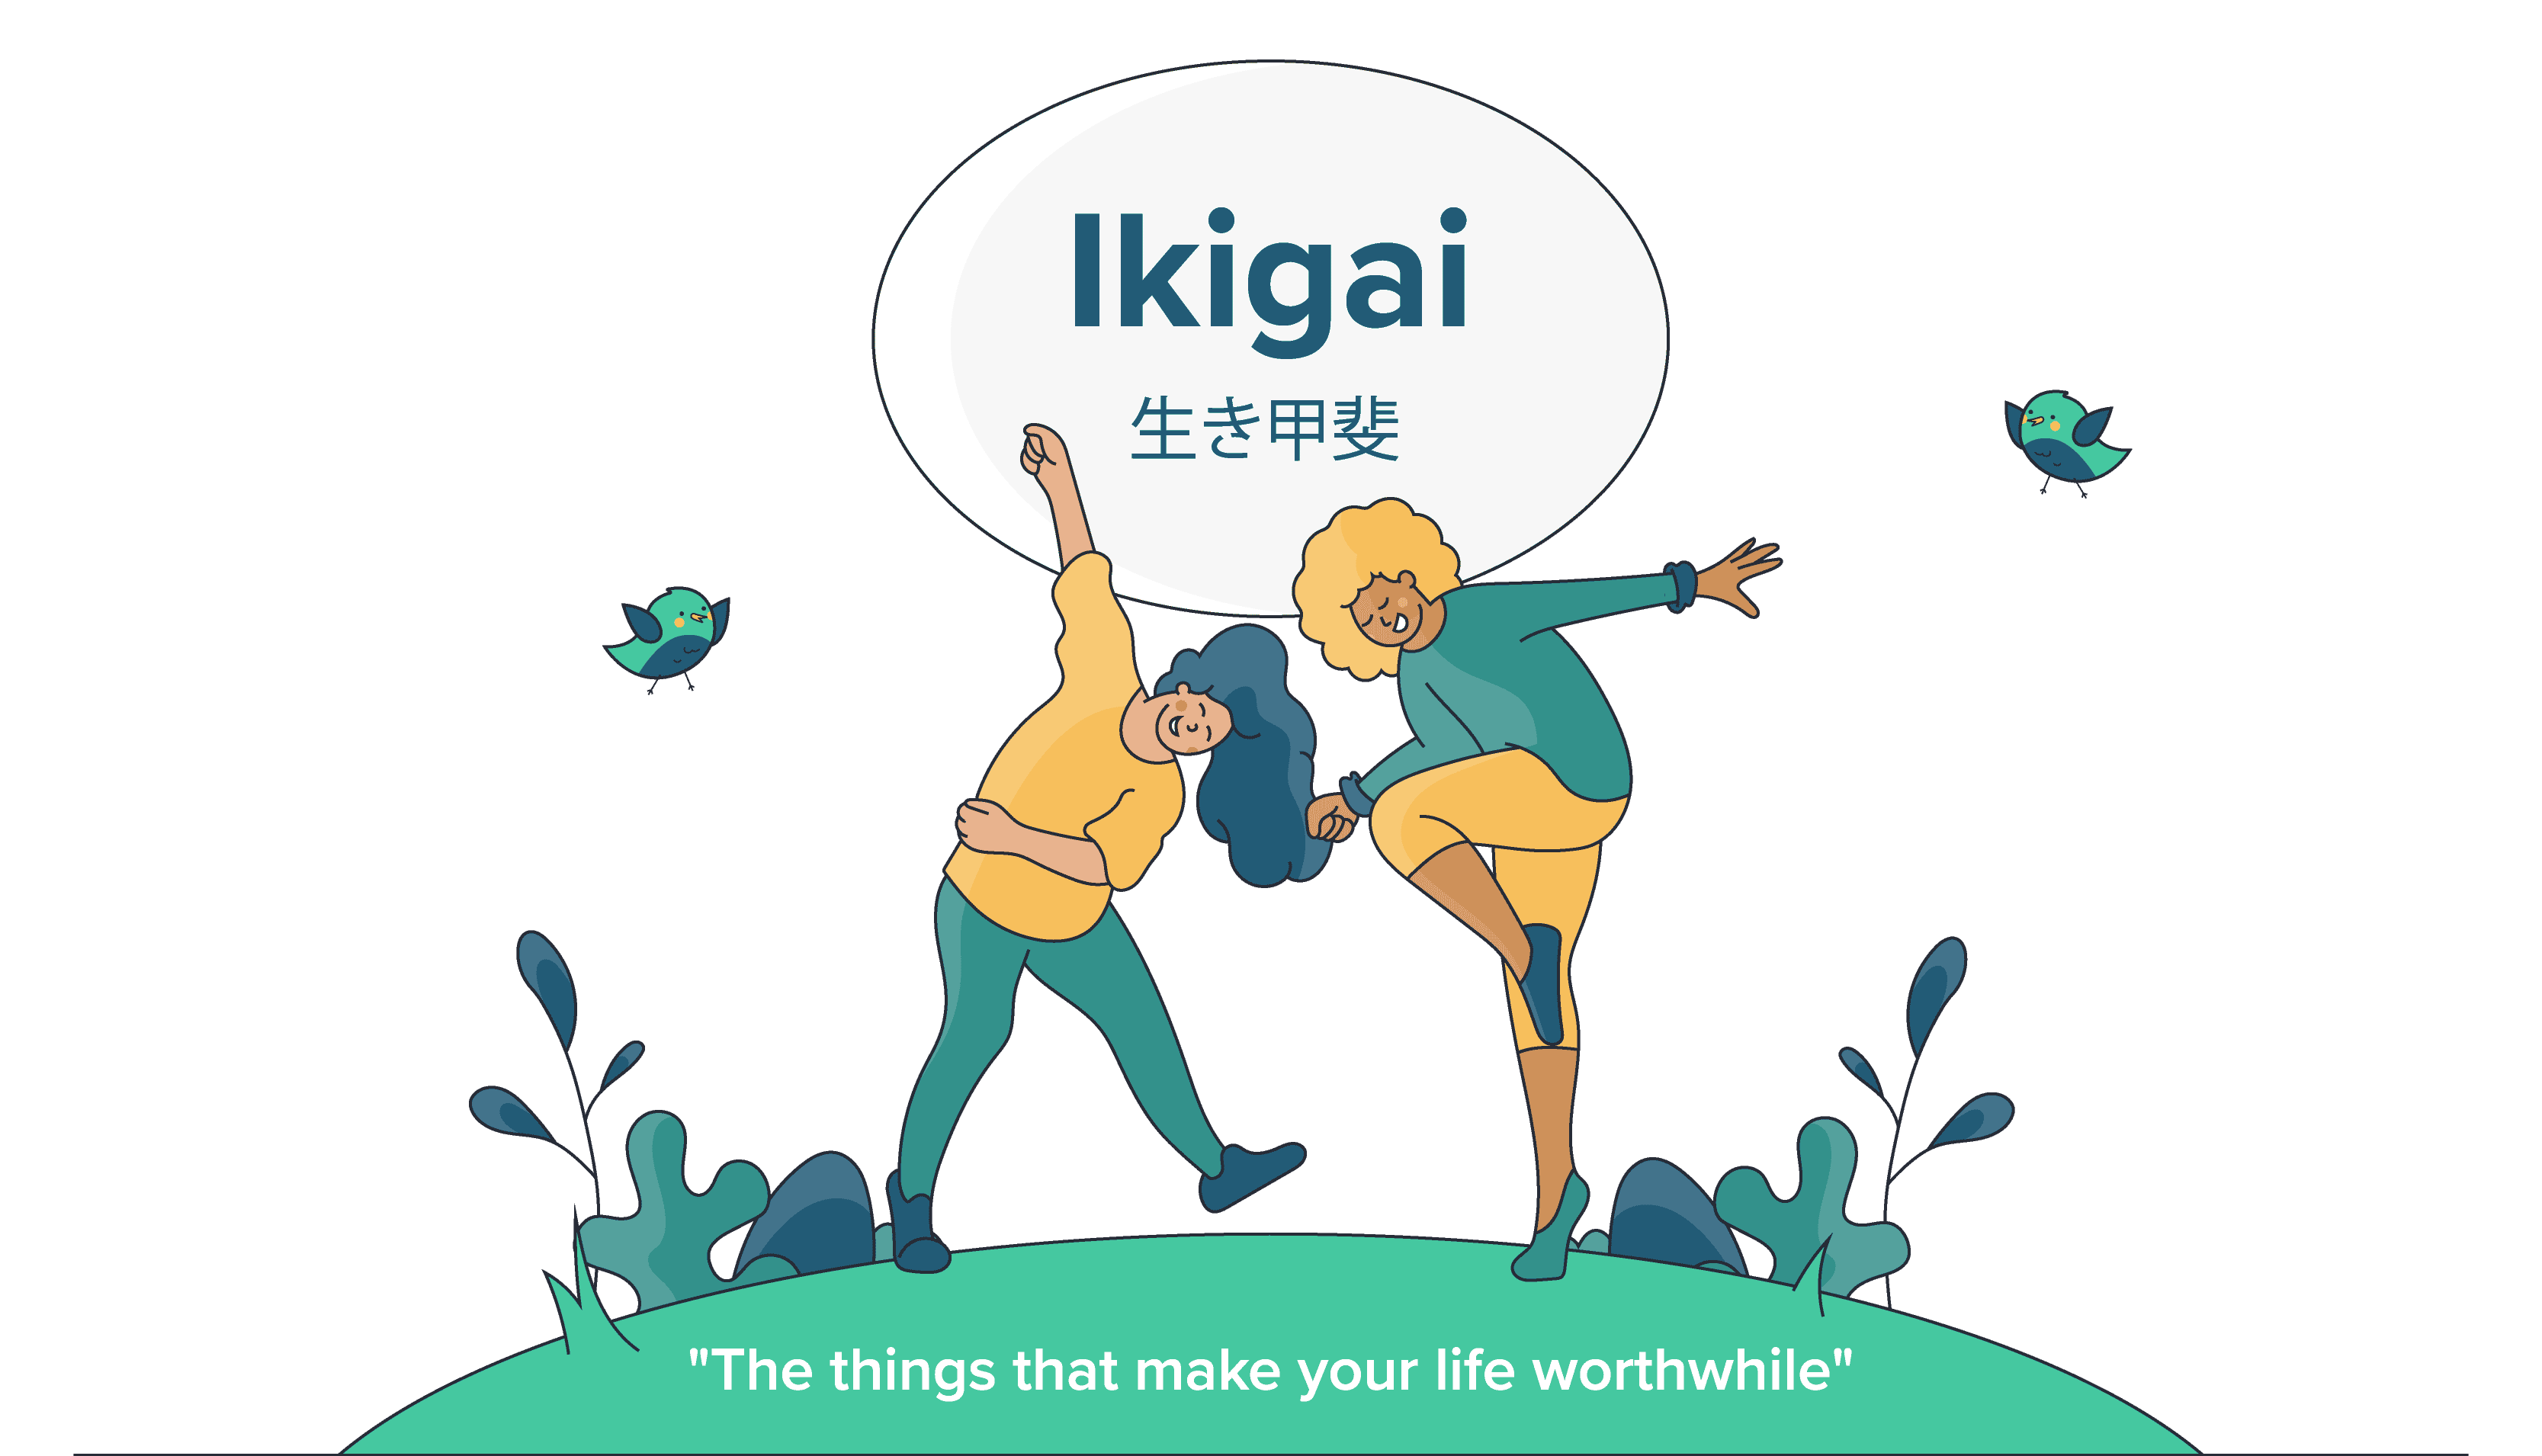 Two persons dancing with joy understanding the meaning of igikai